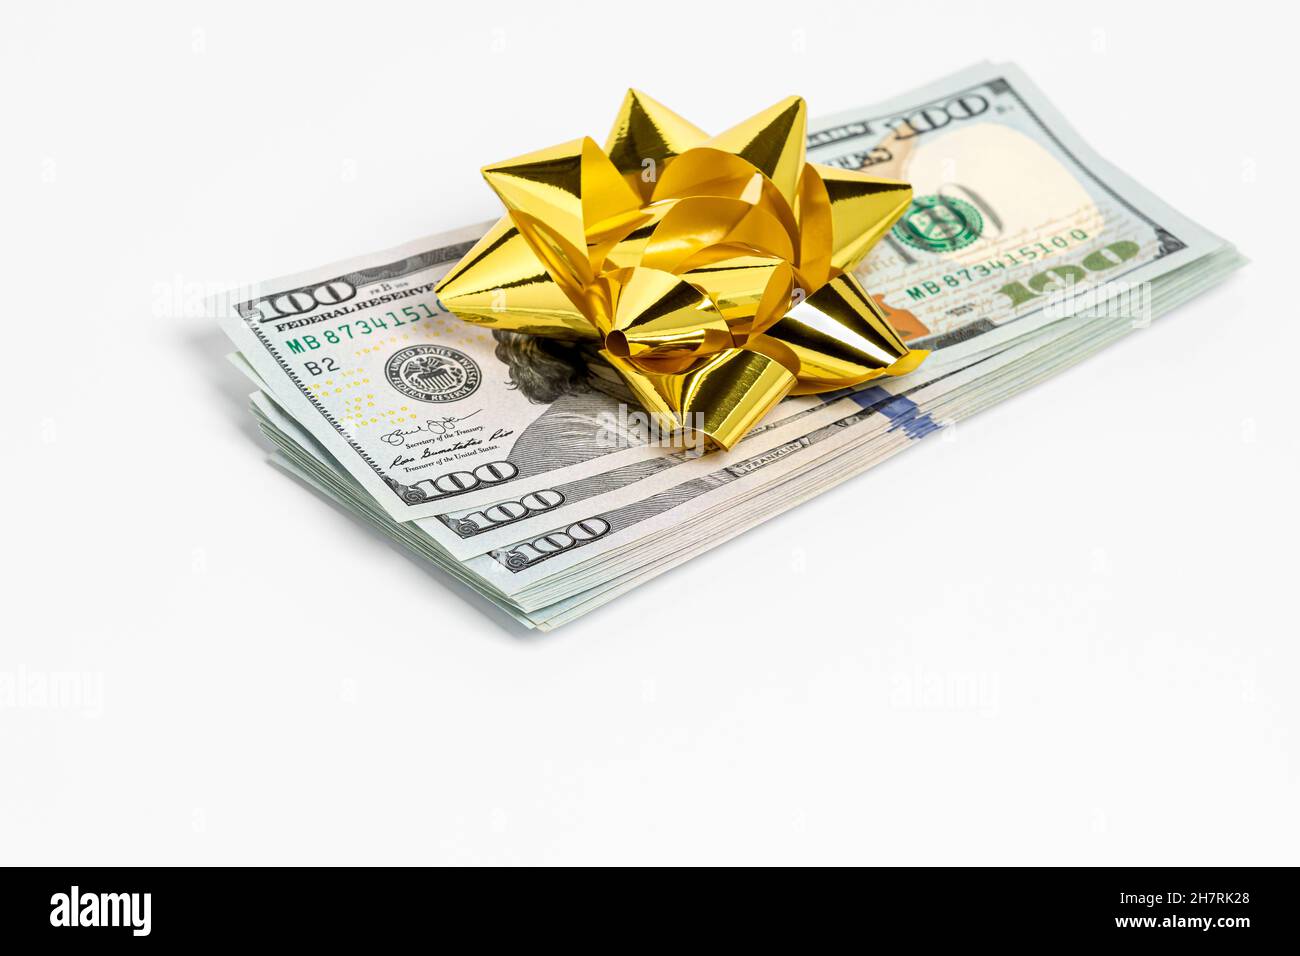 Cash gift of 100 dollar bills with gold bow. Gift tax, charitable donation and holiday present concept. Stock Photo